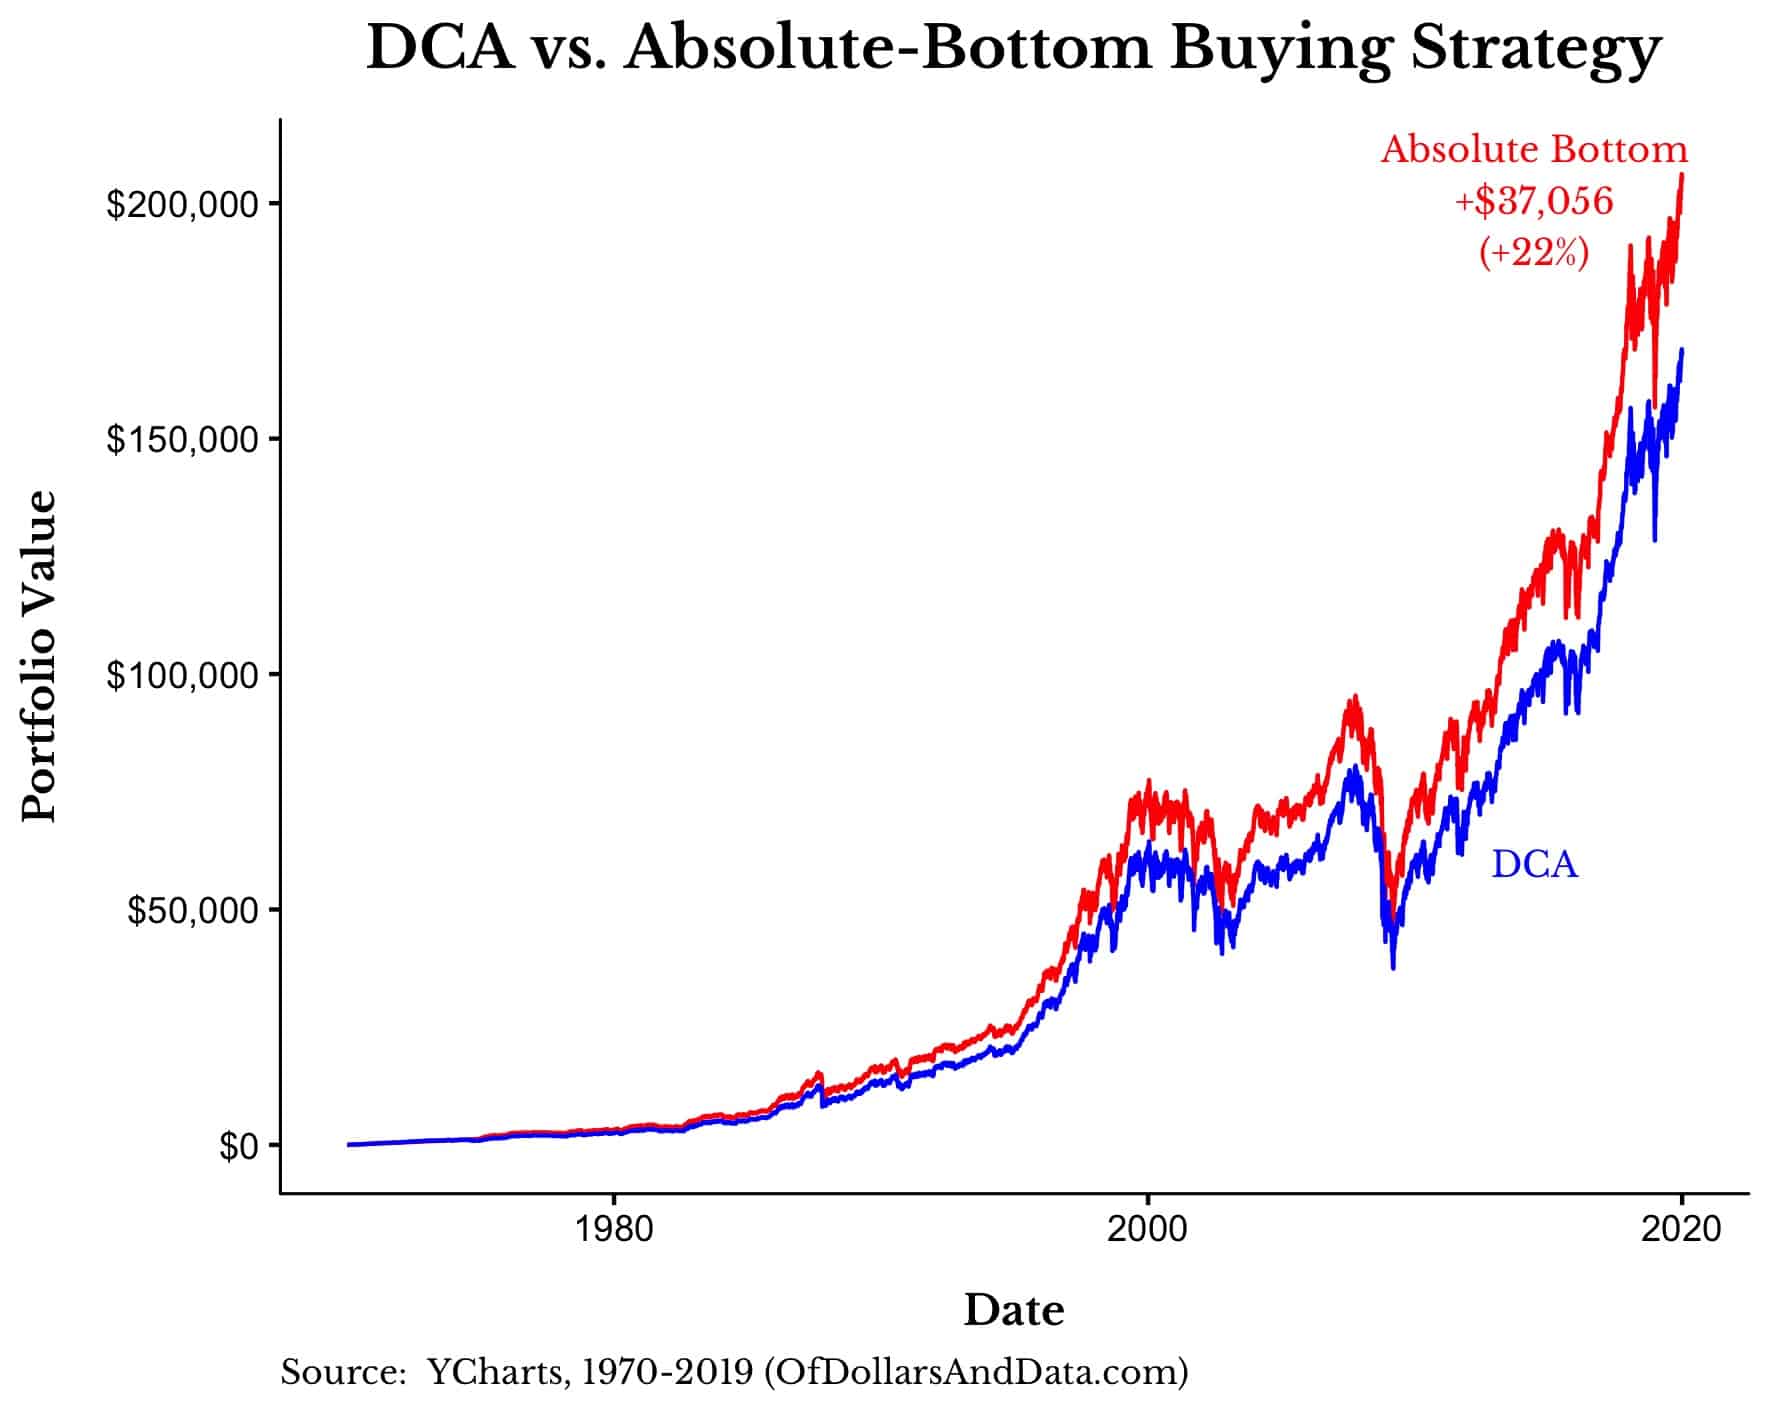 DCA vs. absolute bottom buying strategy performance chart for the Dow from 1970-2019.